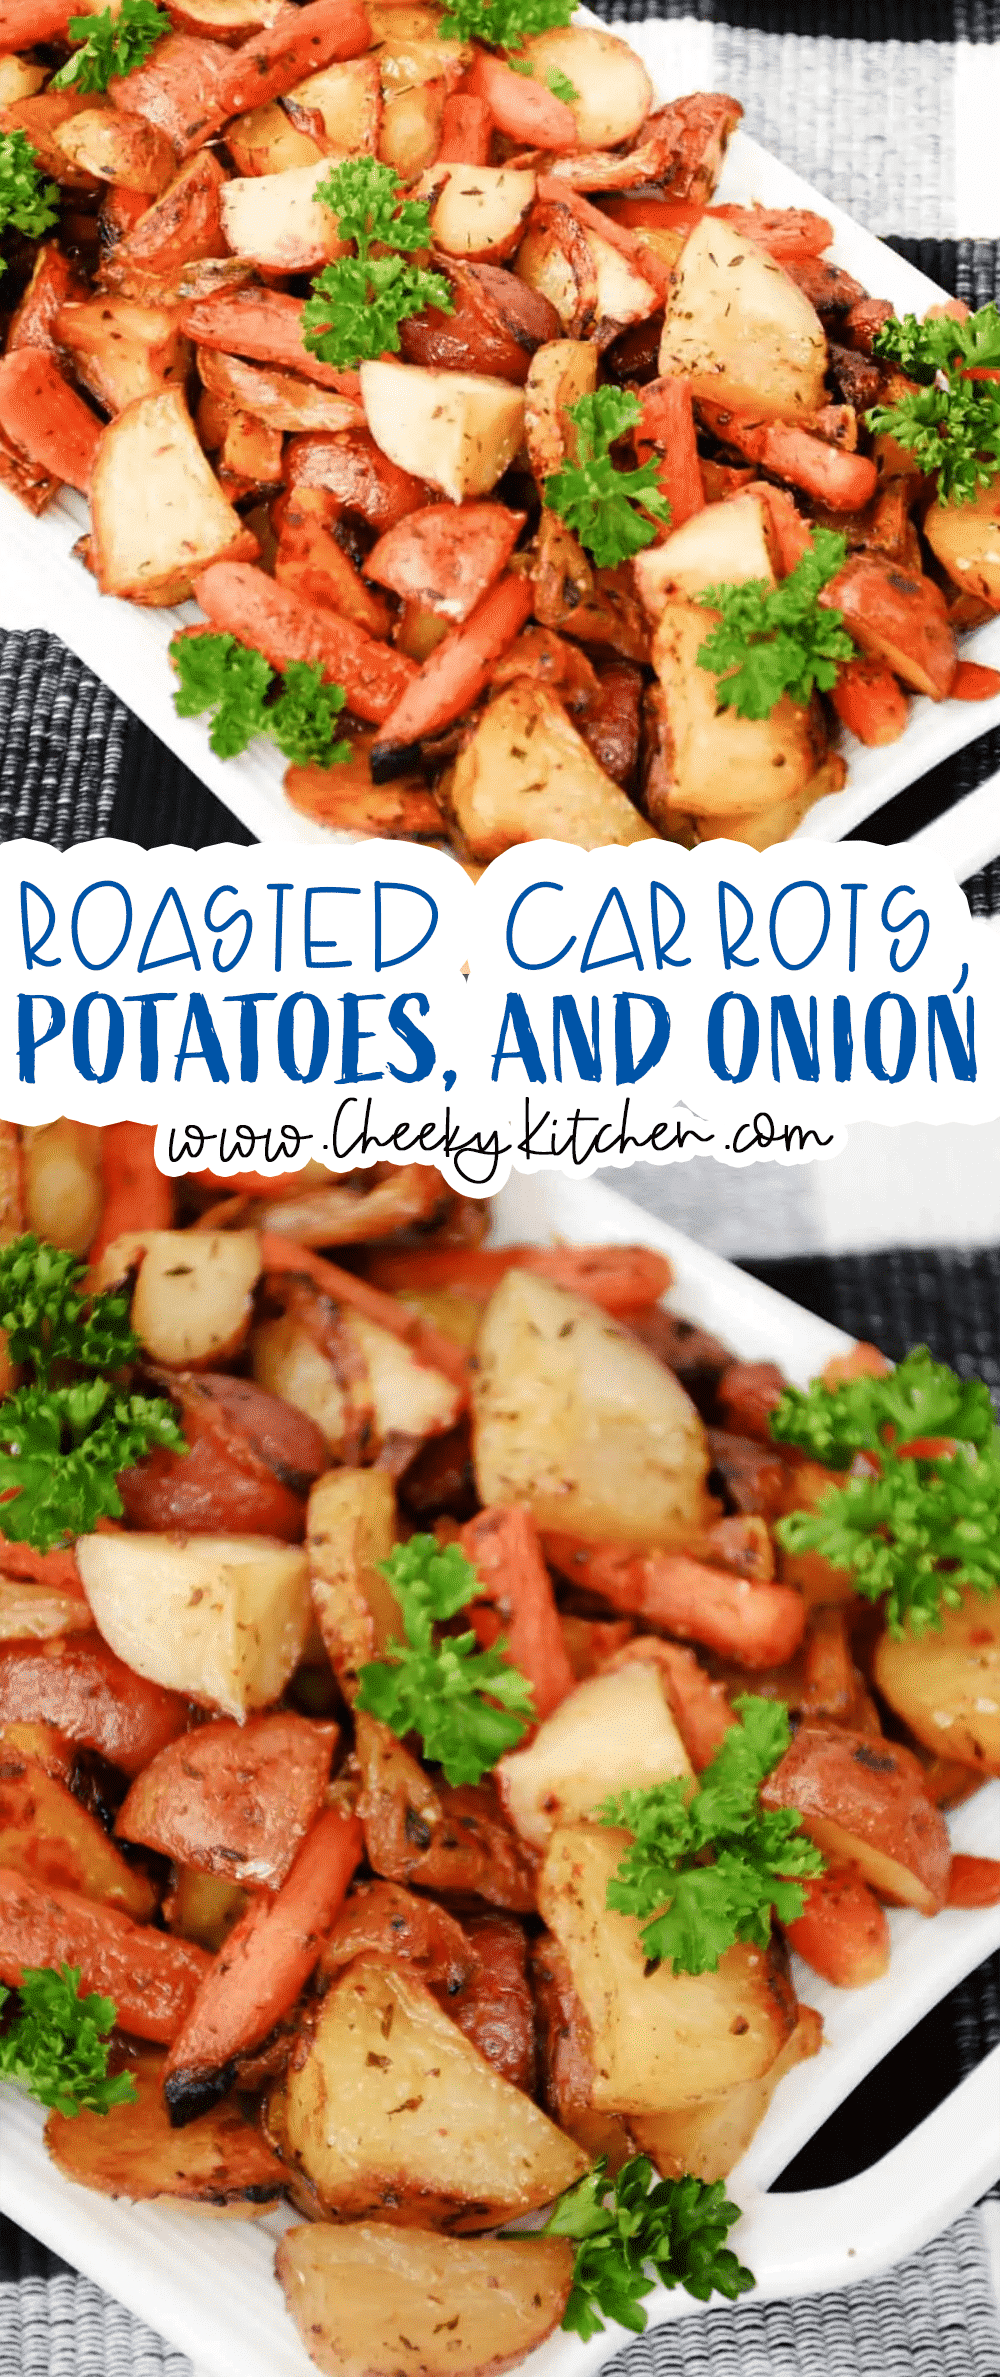 Roasted Carrots, Potatoes, and Onion